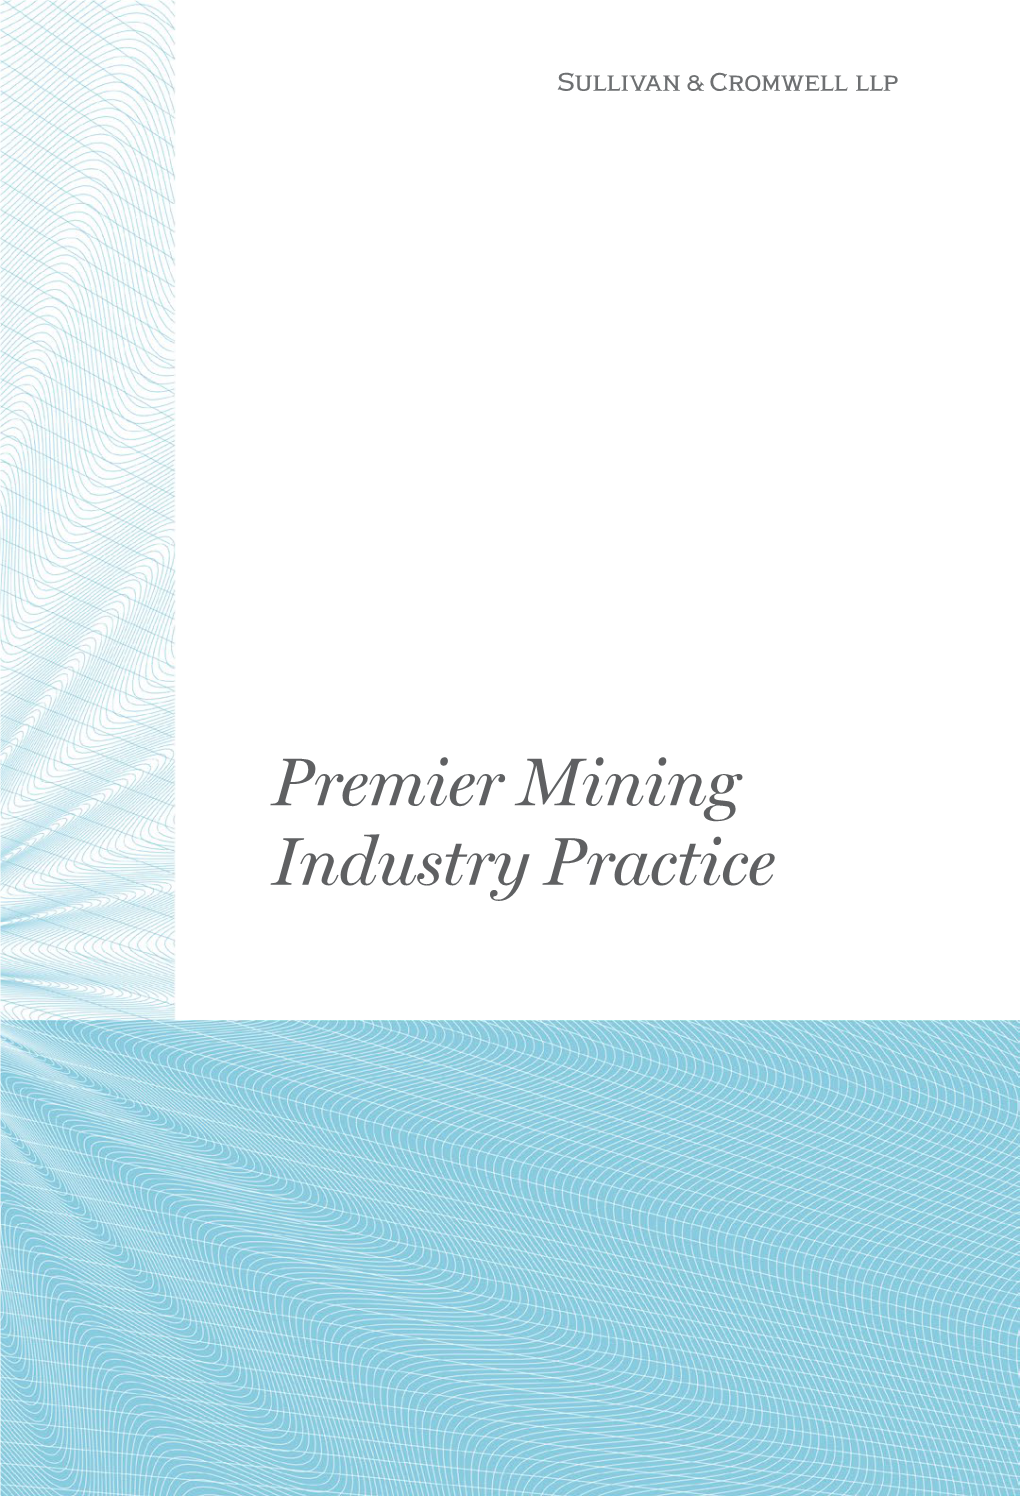 Premier Mining Industry Practice “They Have a Strong Focus on Mining and Metals and That Shows in Their Market Presence.”